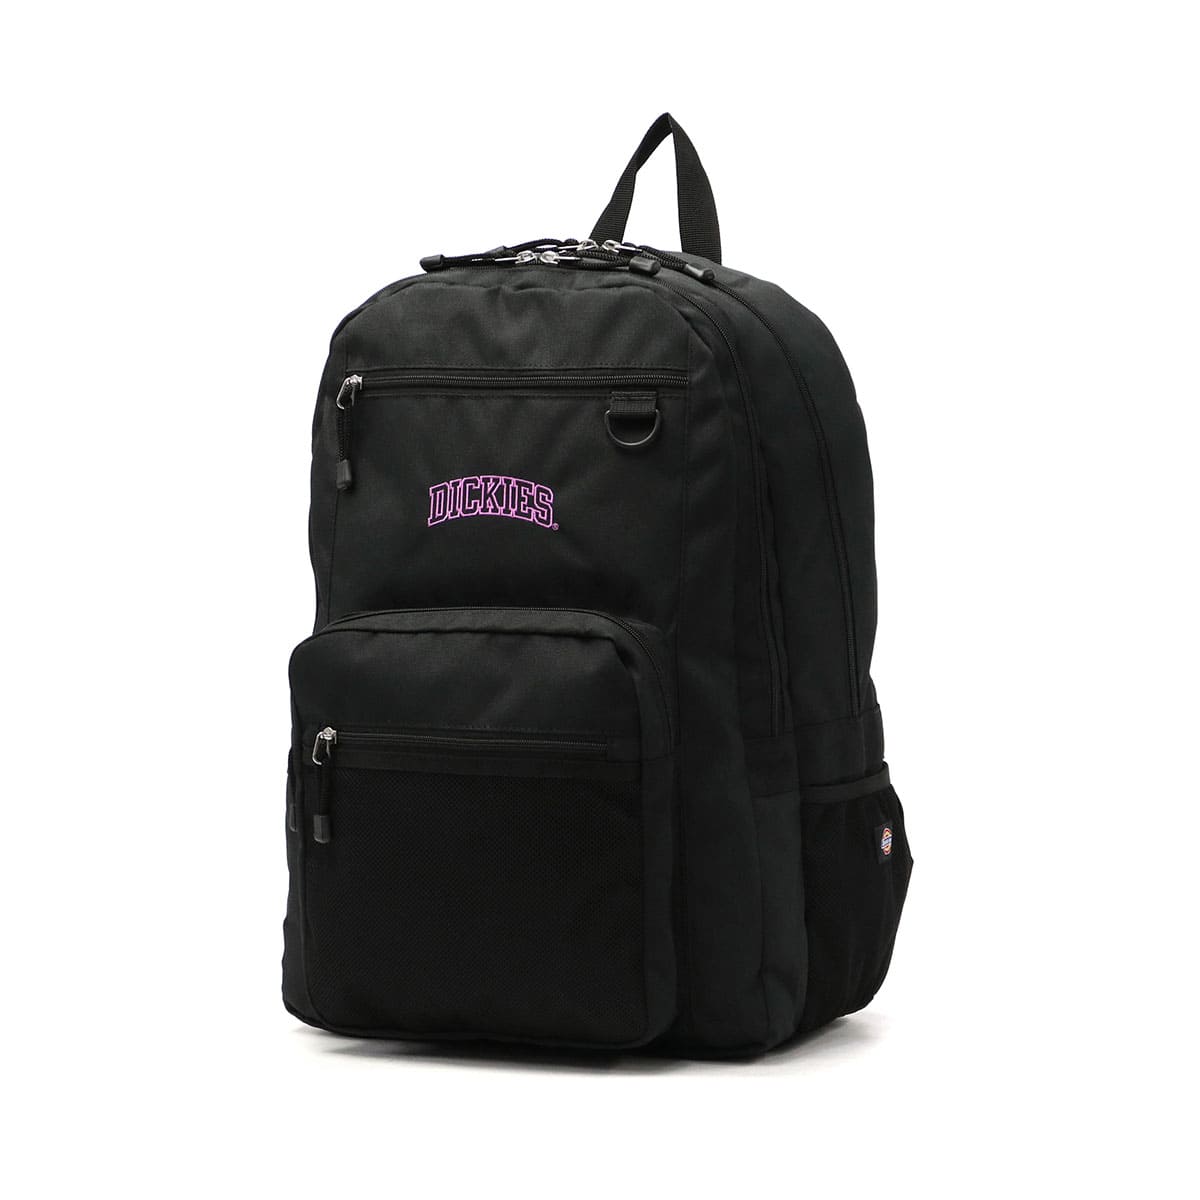 Dickies ディッキーズ ARCH LOGO STUDENT PACK リュック 2層